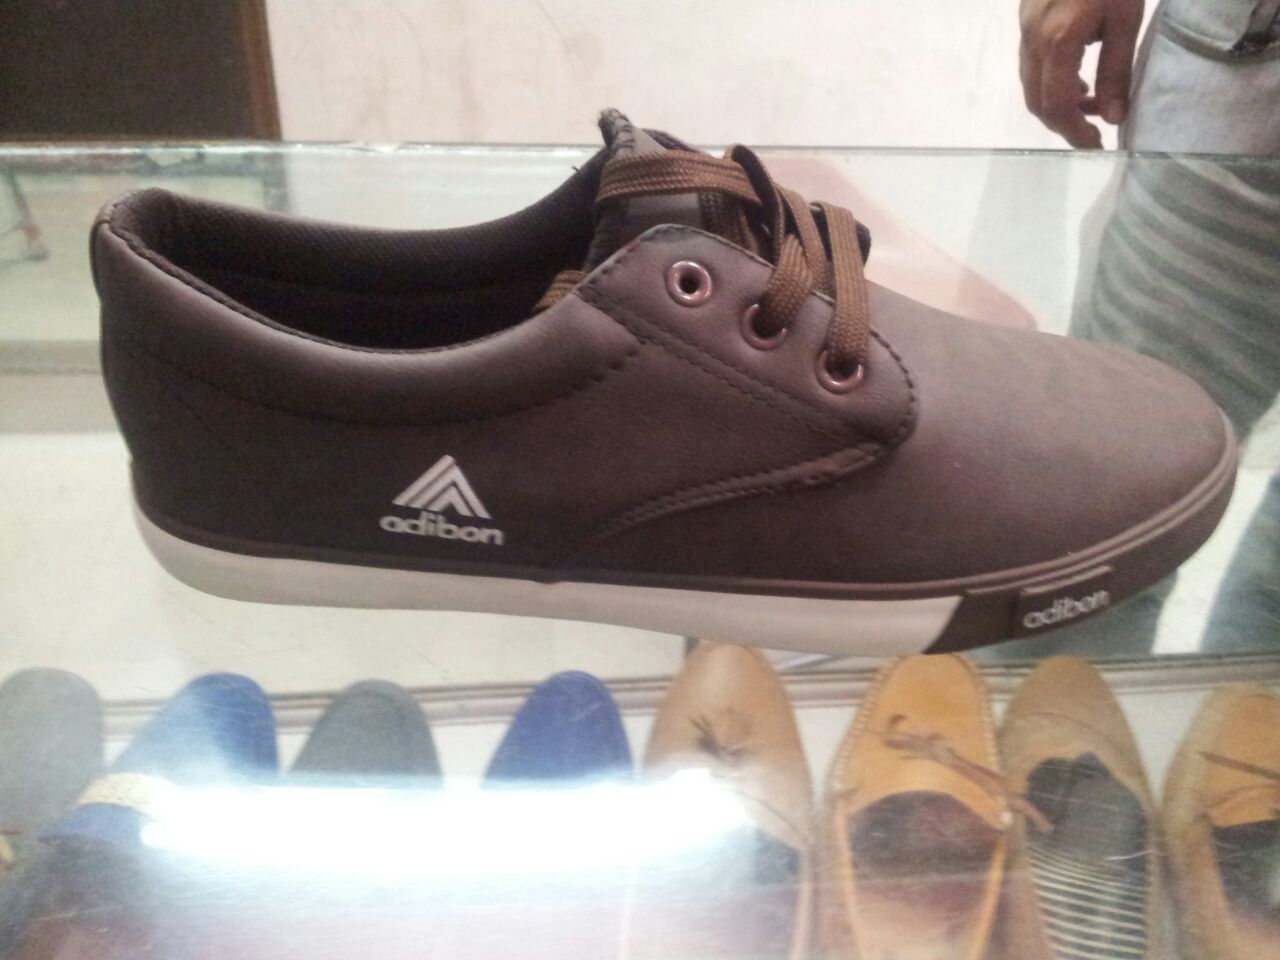 New indian shoee made it export